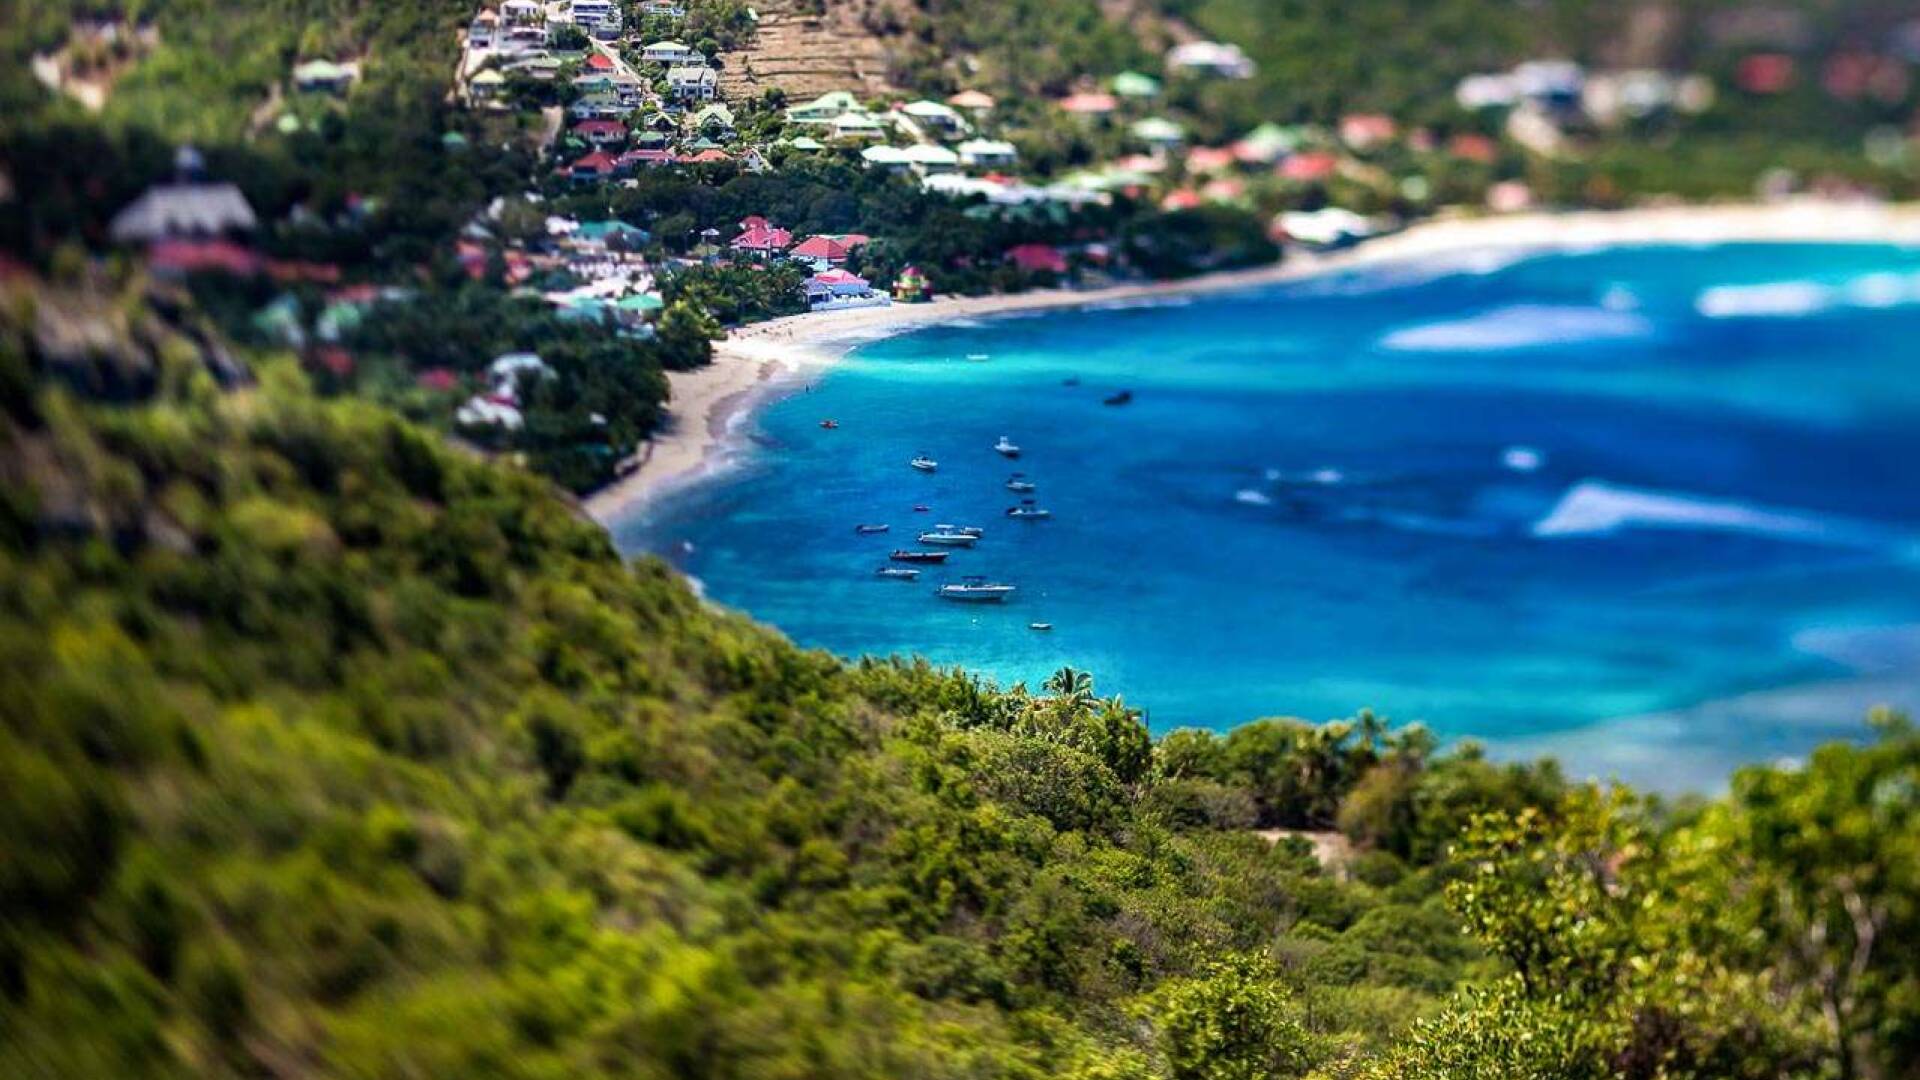 The view from WV YEB, Pointe Milou, St. Barthelemy